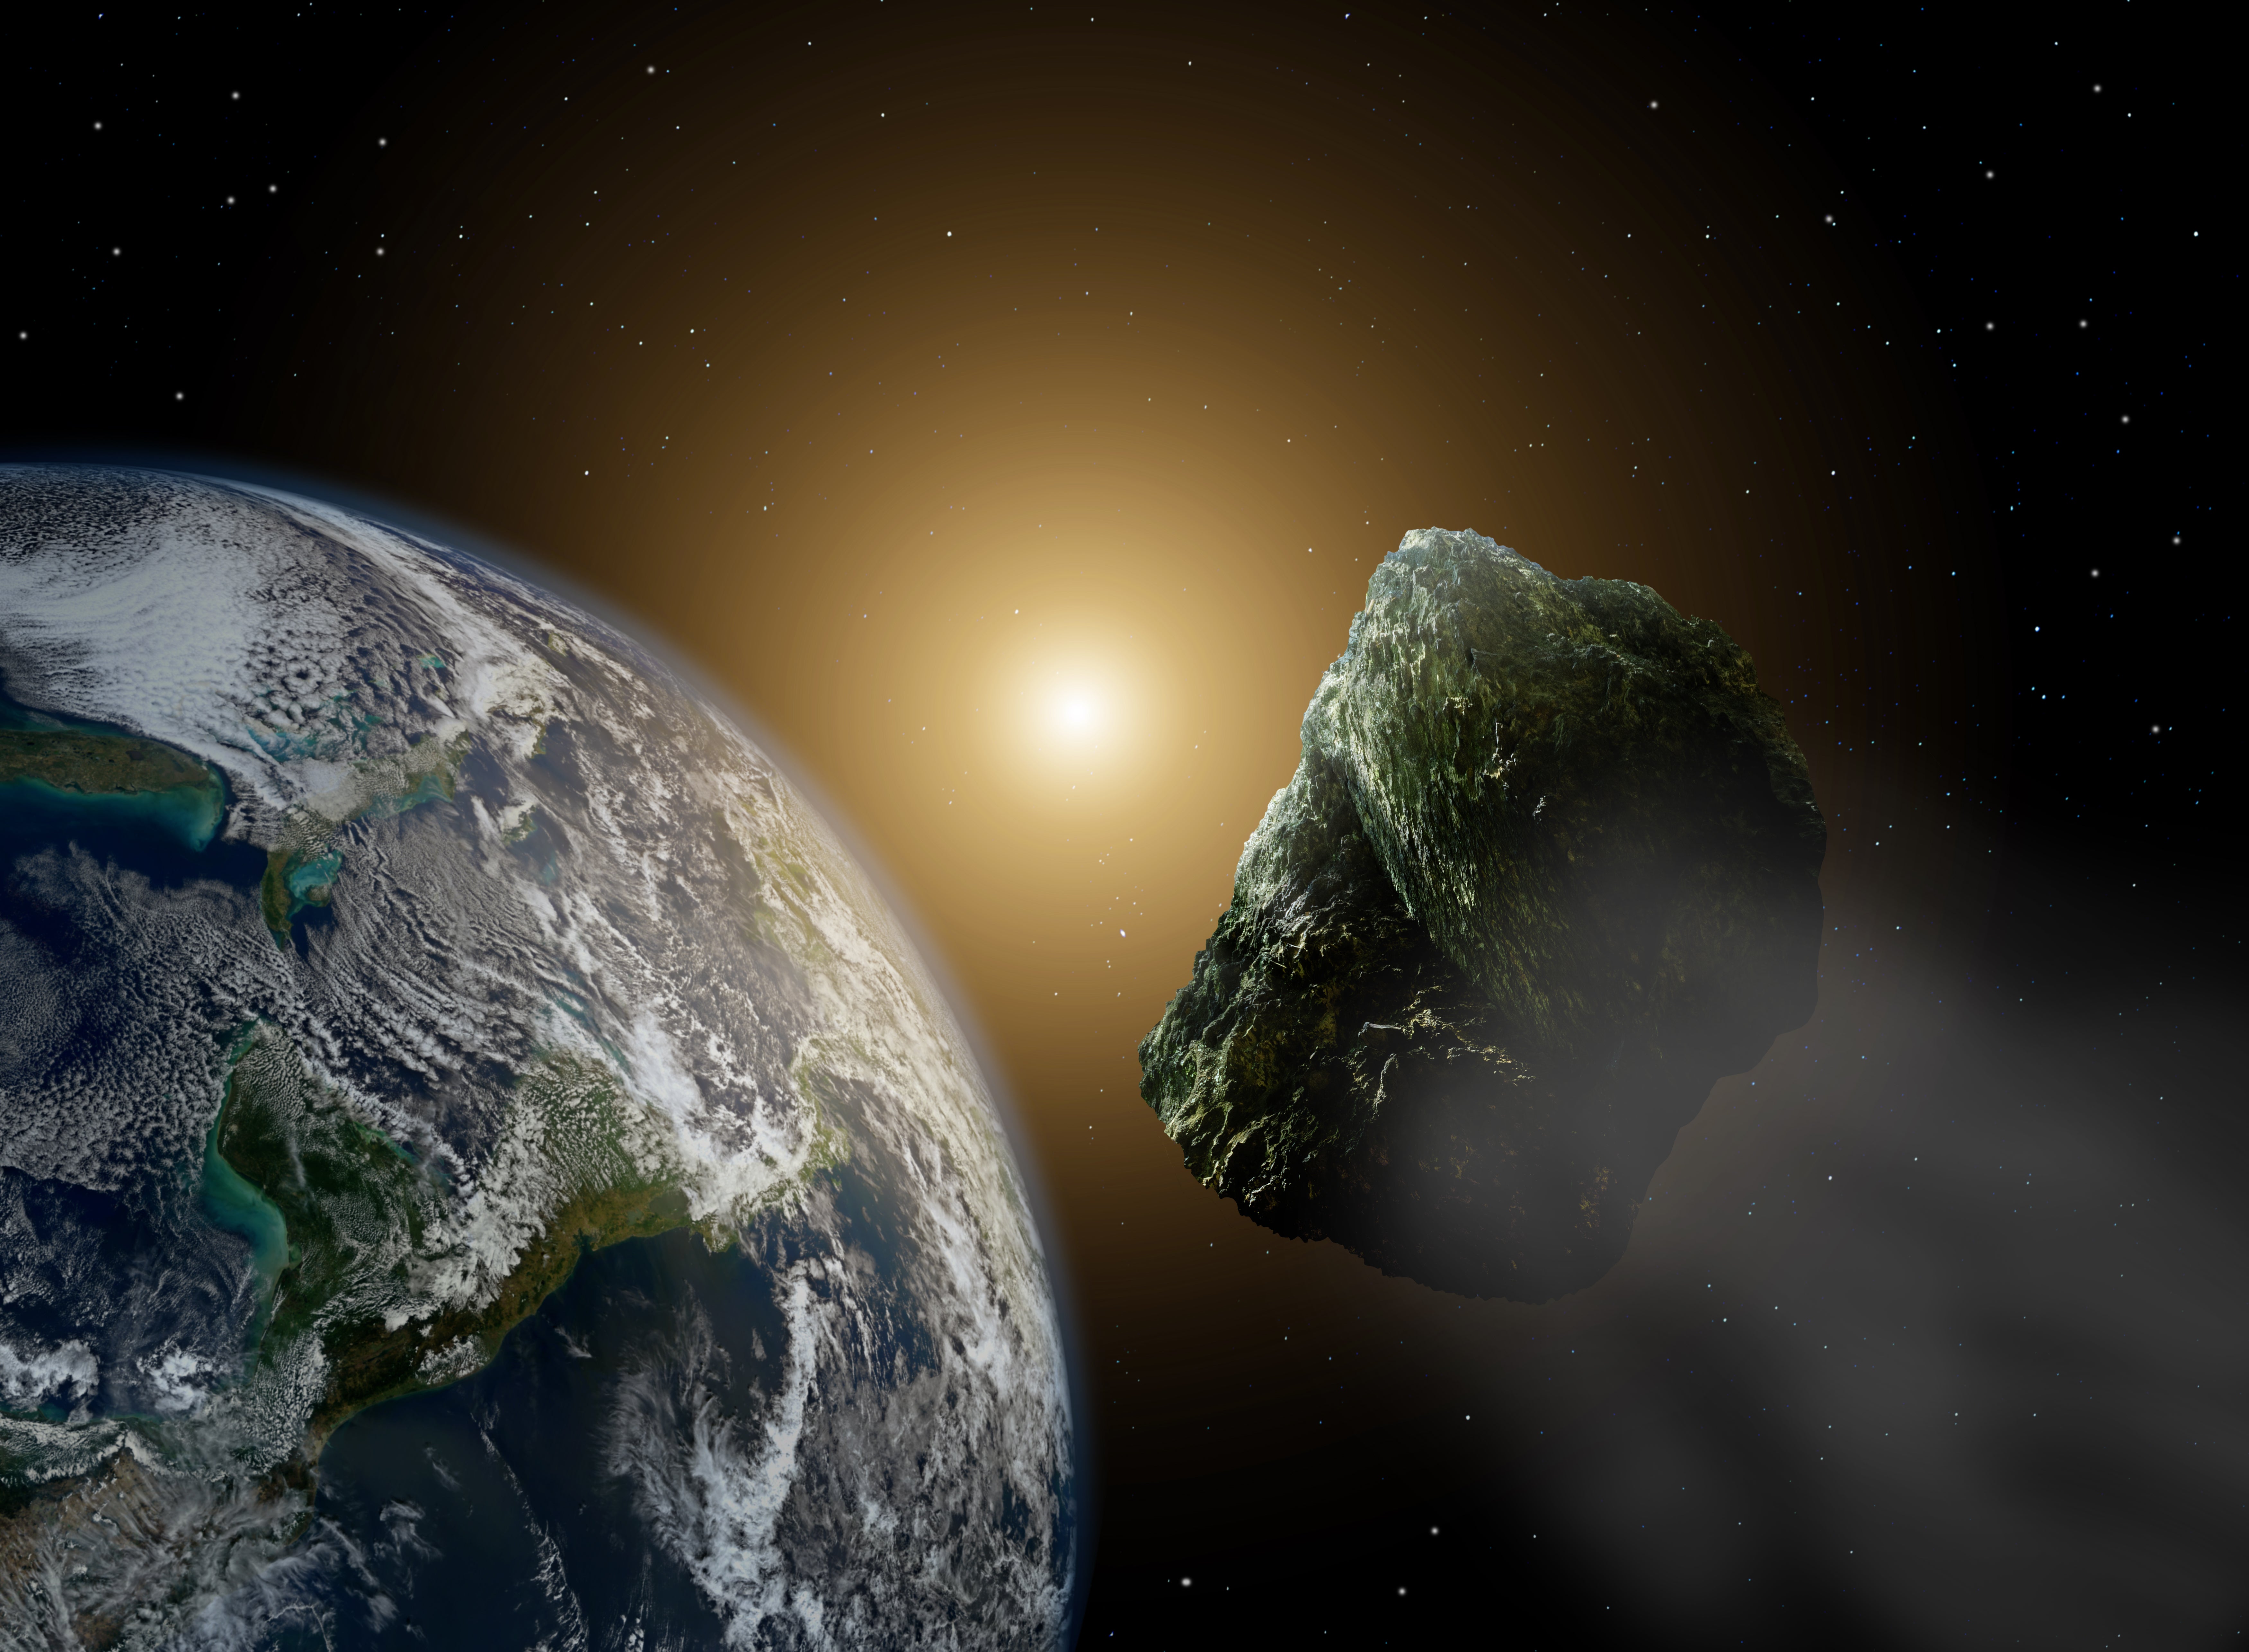 An artist’s rendering of an asteroid passing near Earth.